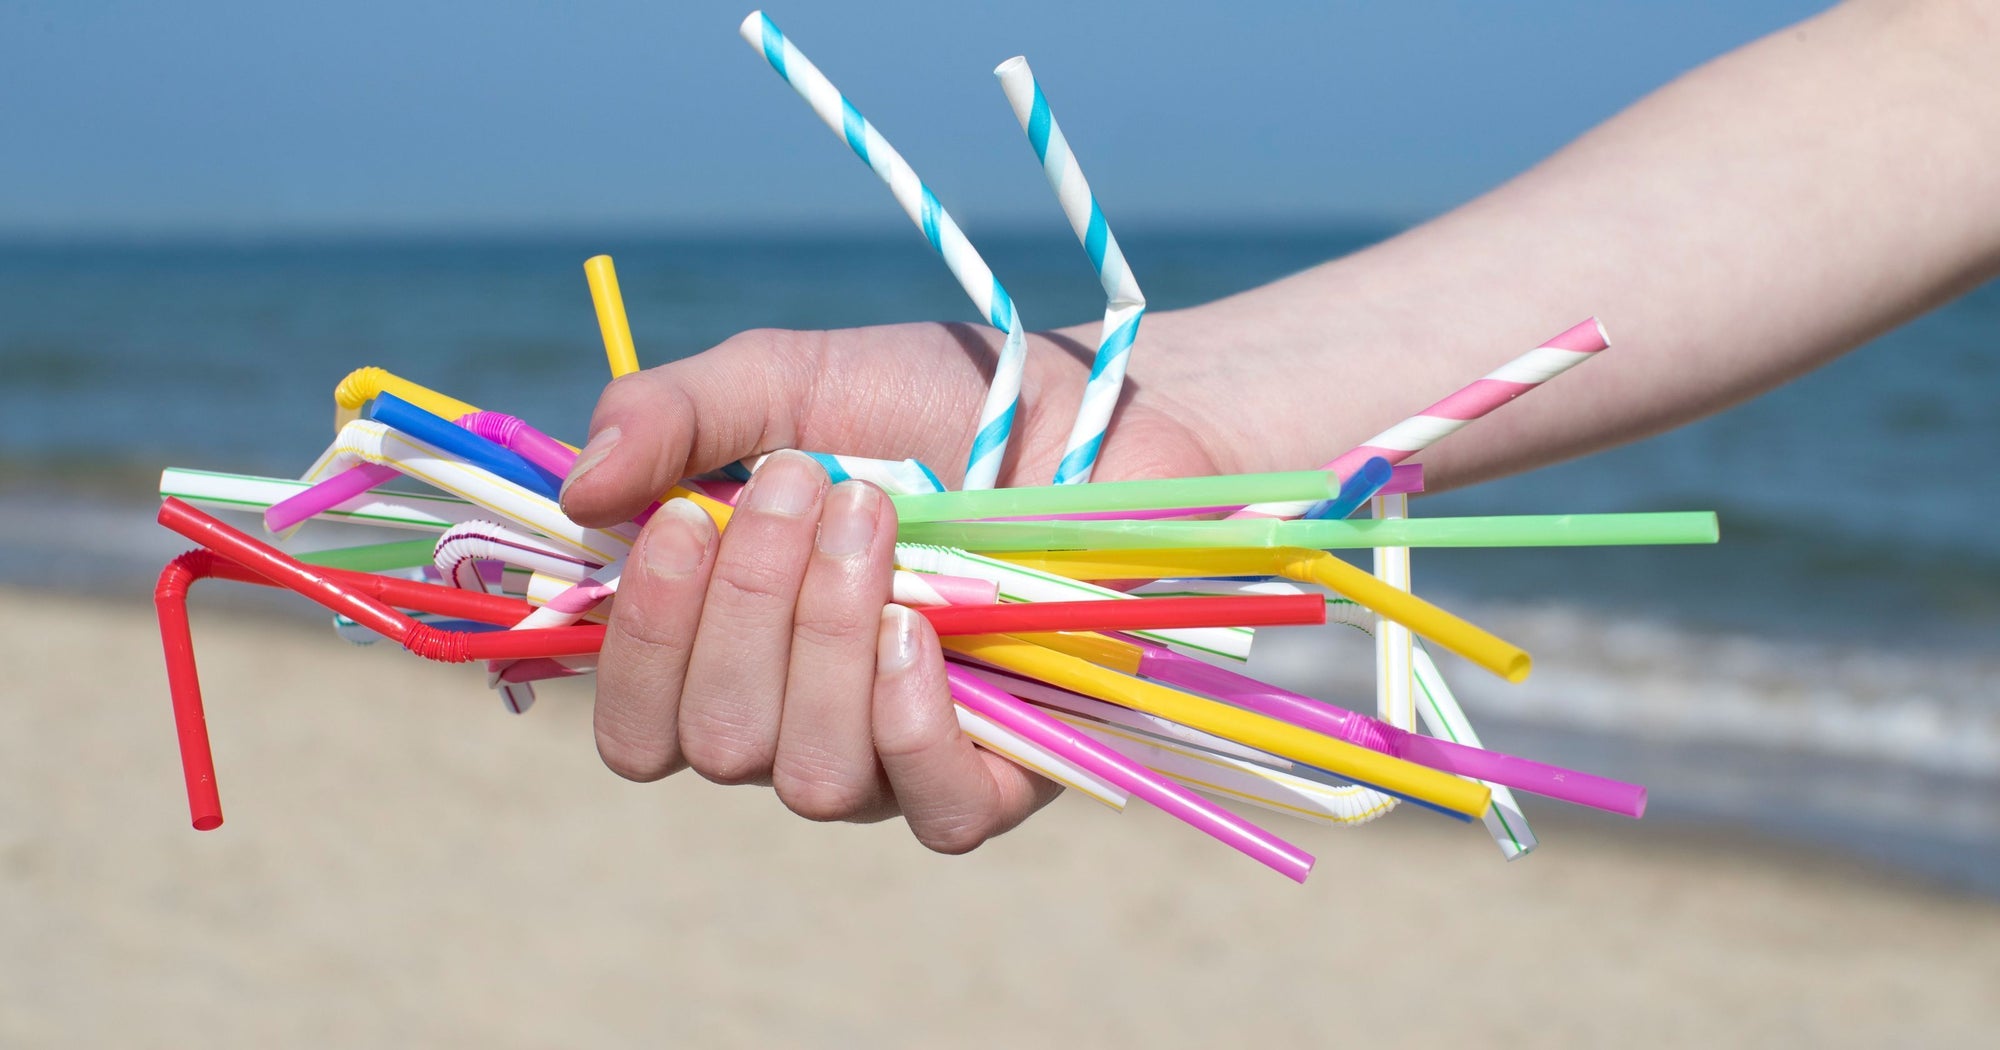 Reusable Straws - How to Keep Our Beaches Clean